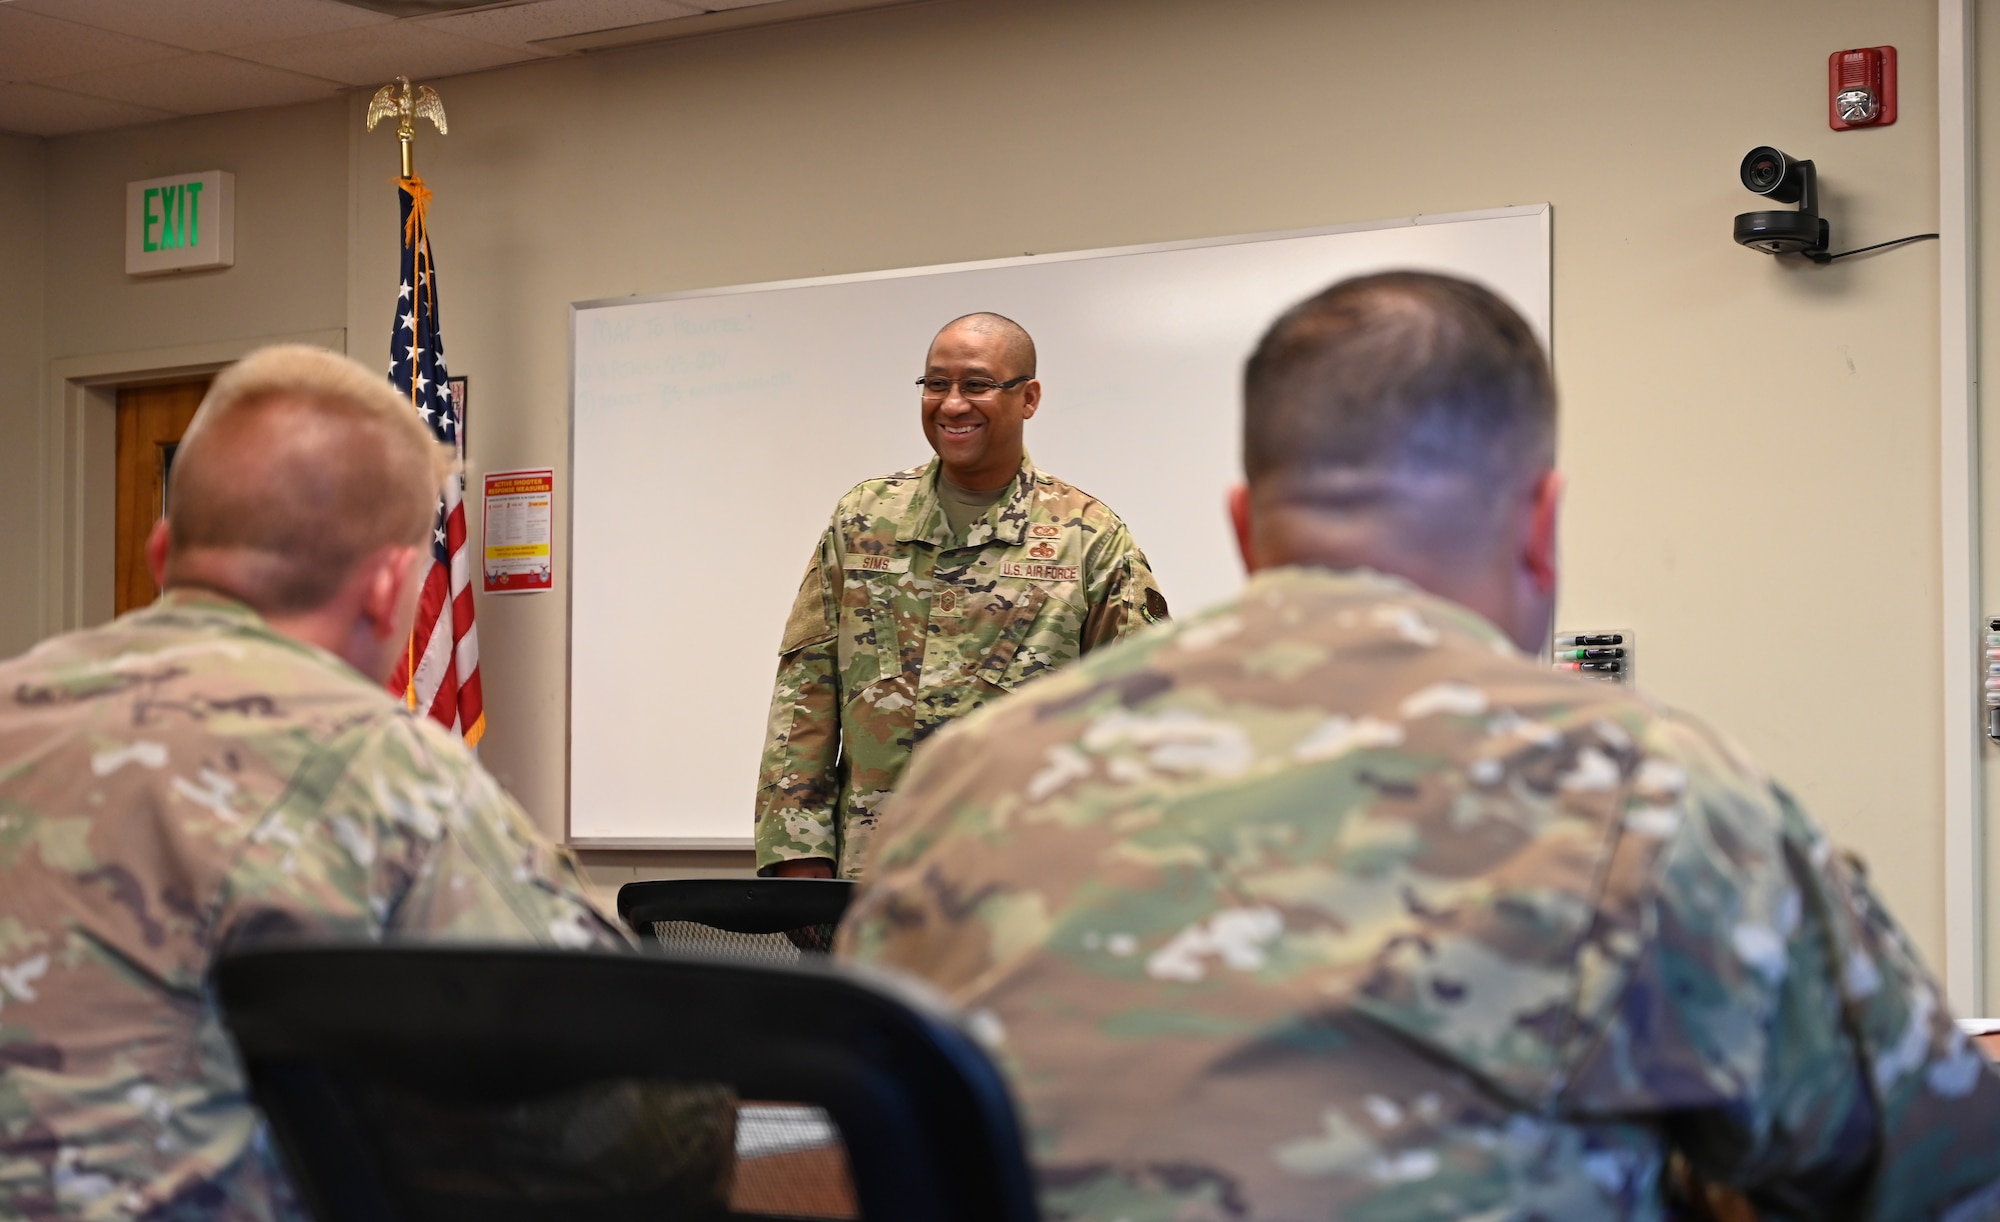 U.S. Air Force Chief Master Sgt. Anthony Sims, Maryland Air National Guard state command chief, speaks with Airmen at the Additional Duty First Sergeant's Course at Warfield Air National Guard Base at Martin State Airport in Middle River, Maryland, August 4, 2022. Chief Sims currently serves as the 12th Maryland Air National Guard state command chief and will assume the role of Maryland National Guard senior enlisted leader on August 15. (U.S. Air National Guard photo by Master Sgt. Chris Schepers)